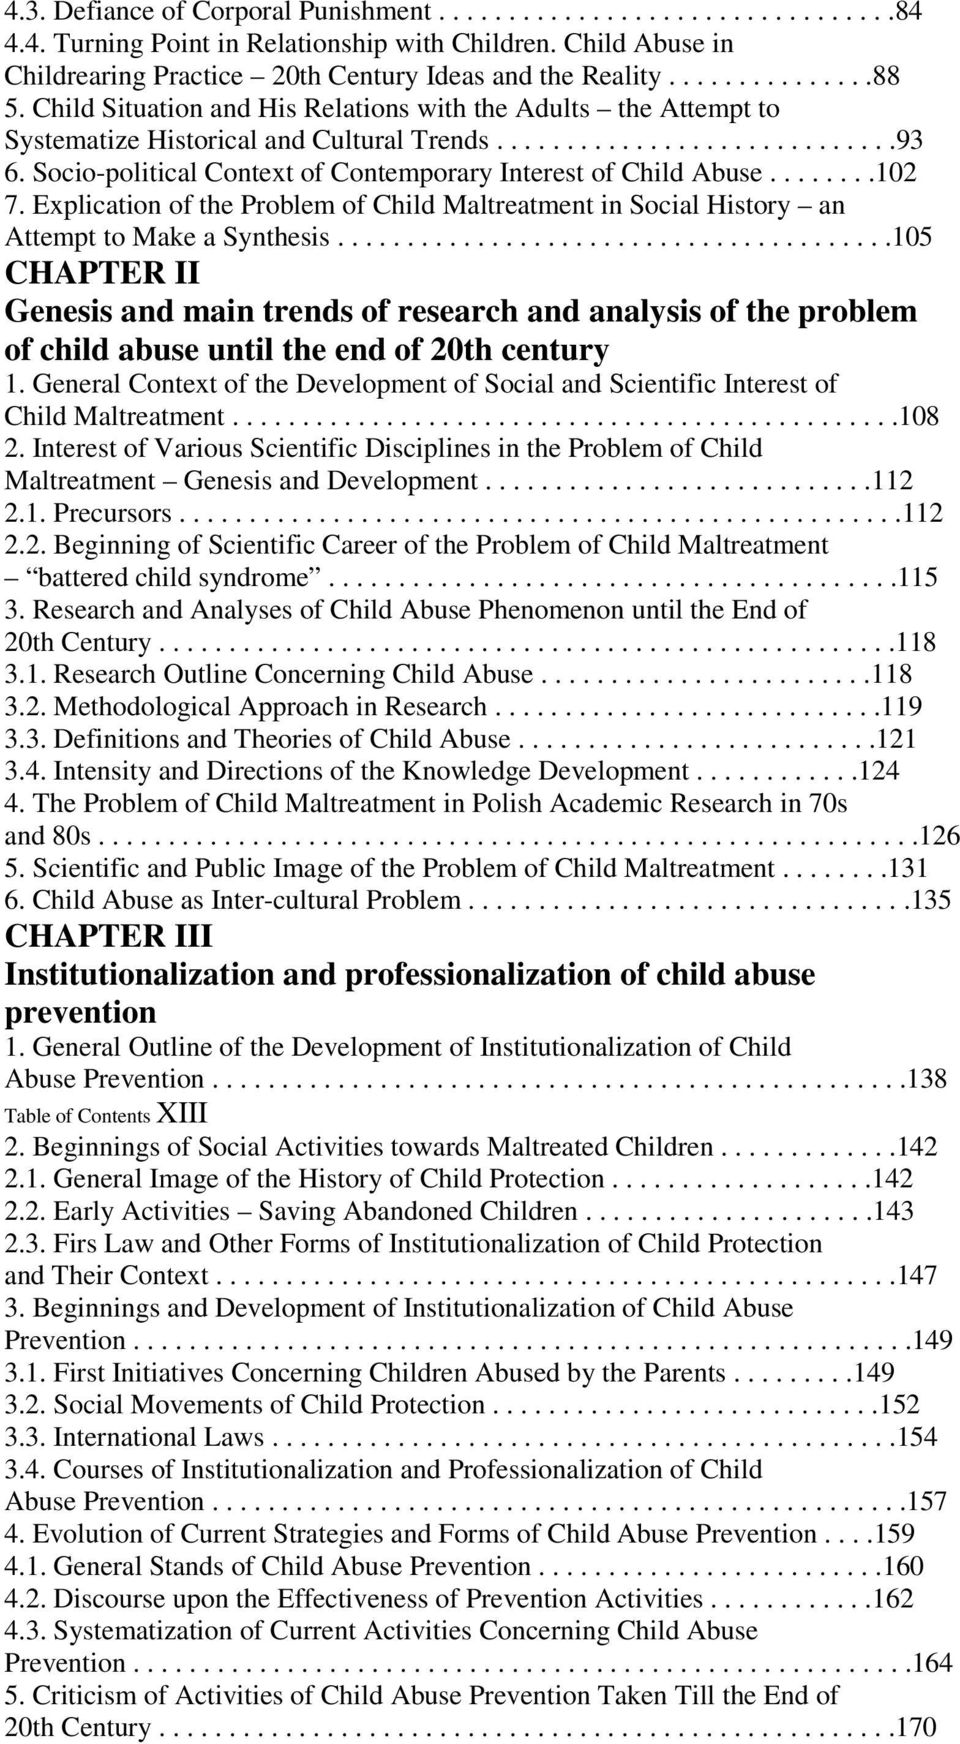 Socio-political Context of Contemporary Interest of Child Abuse........102 7. Explication of the Problem of Child Maltreatment in Social History an Attempt to Make a Synthesis.